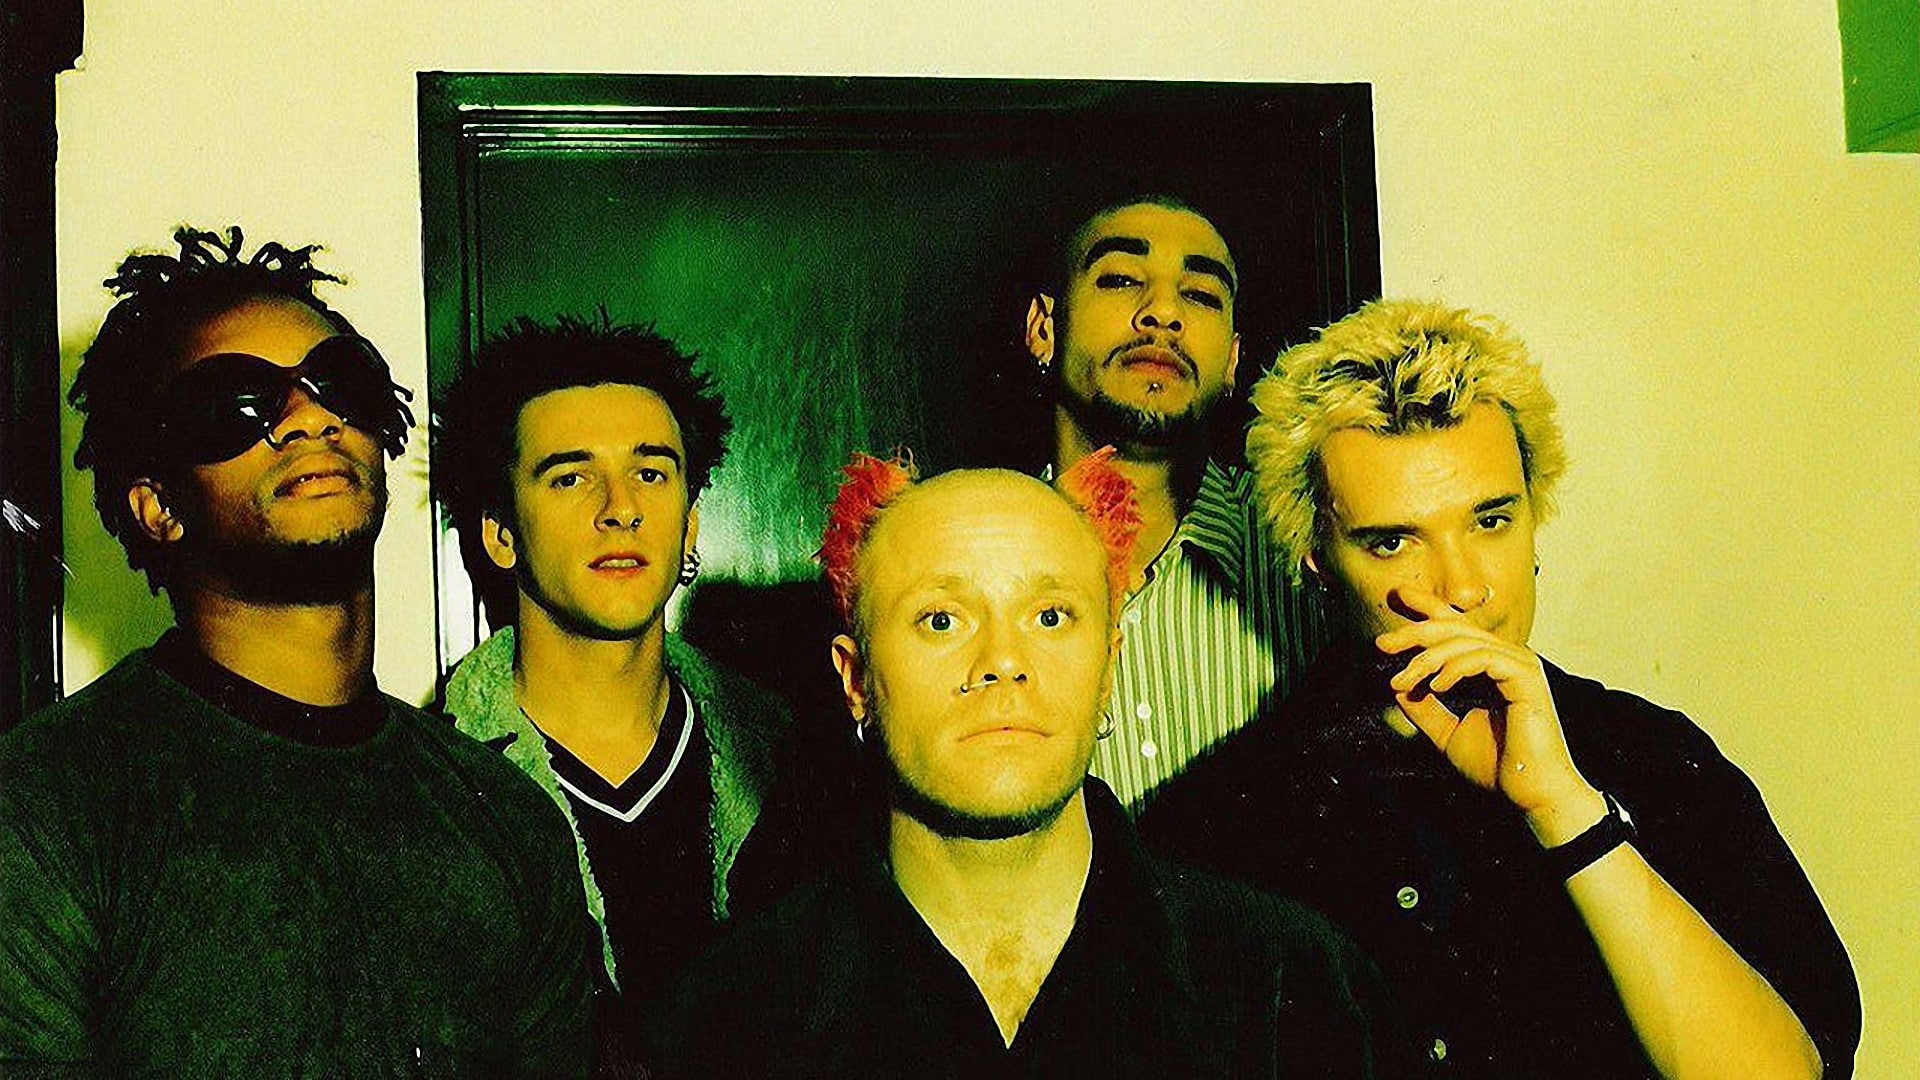 The prodigy, Haircuts, Band, Door, Piercing, group of people